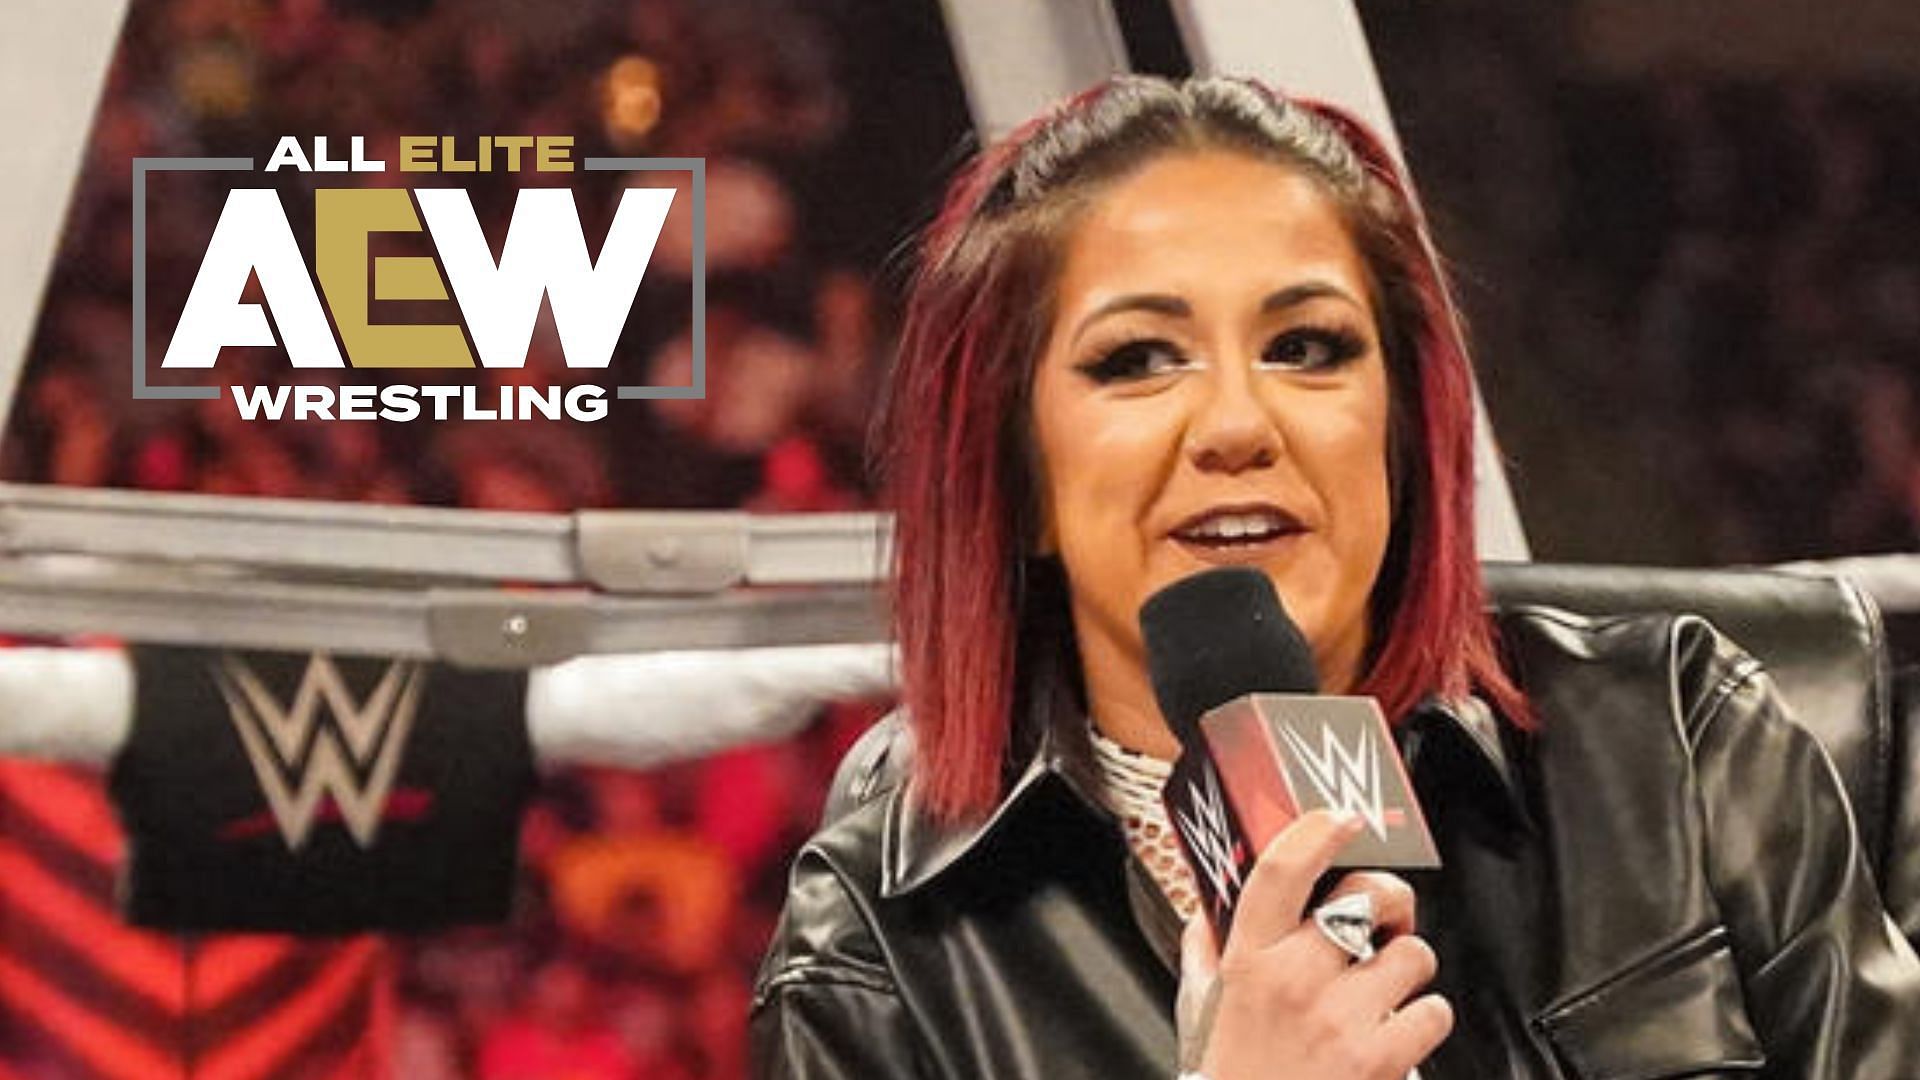 Bayley broke character to wish an AEW star a speedy recovery